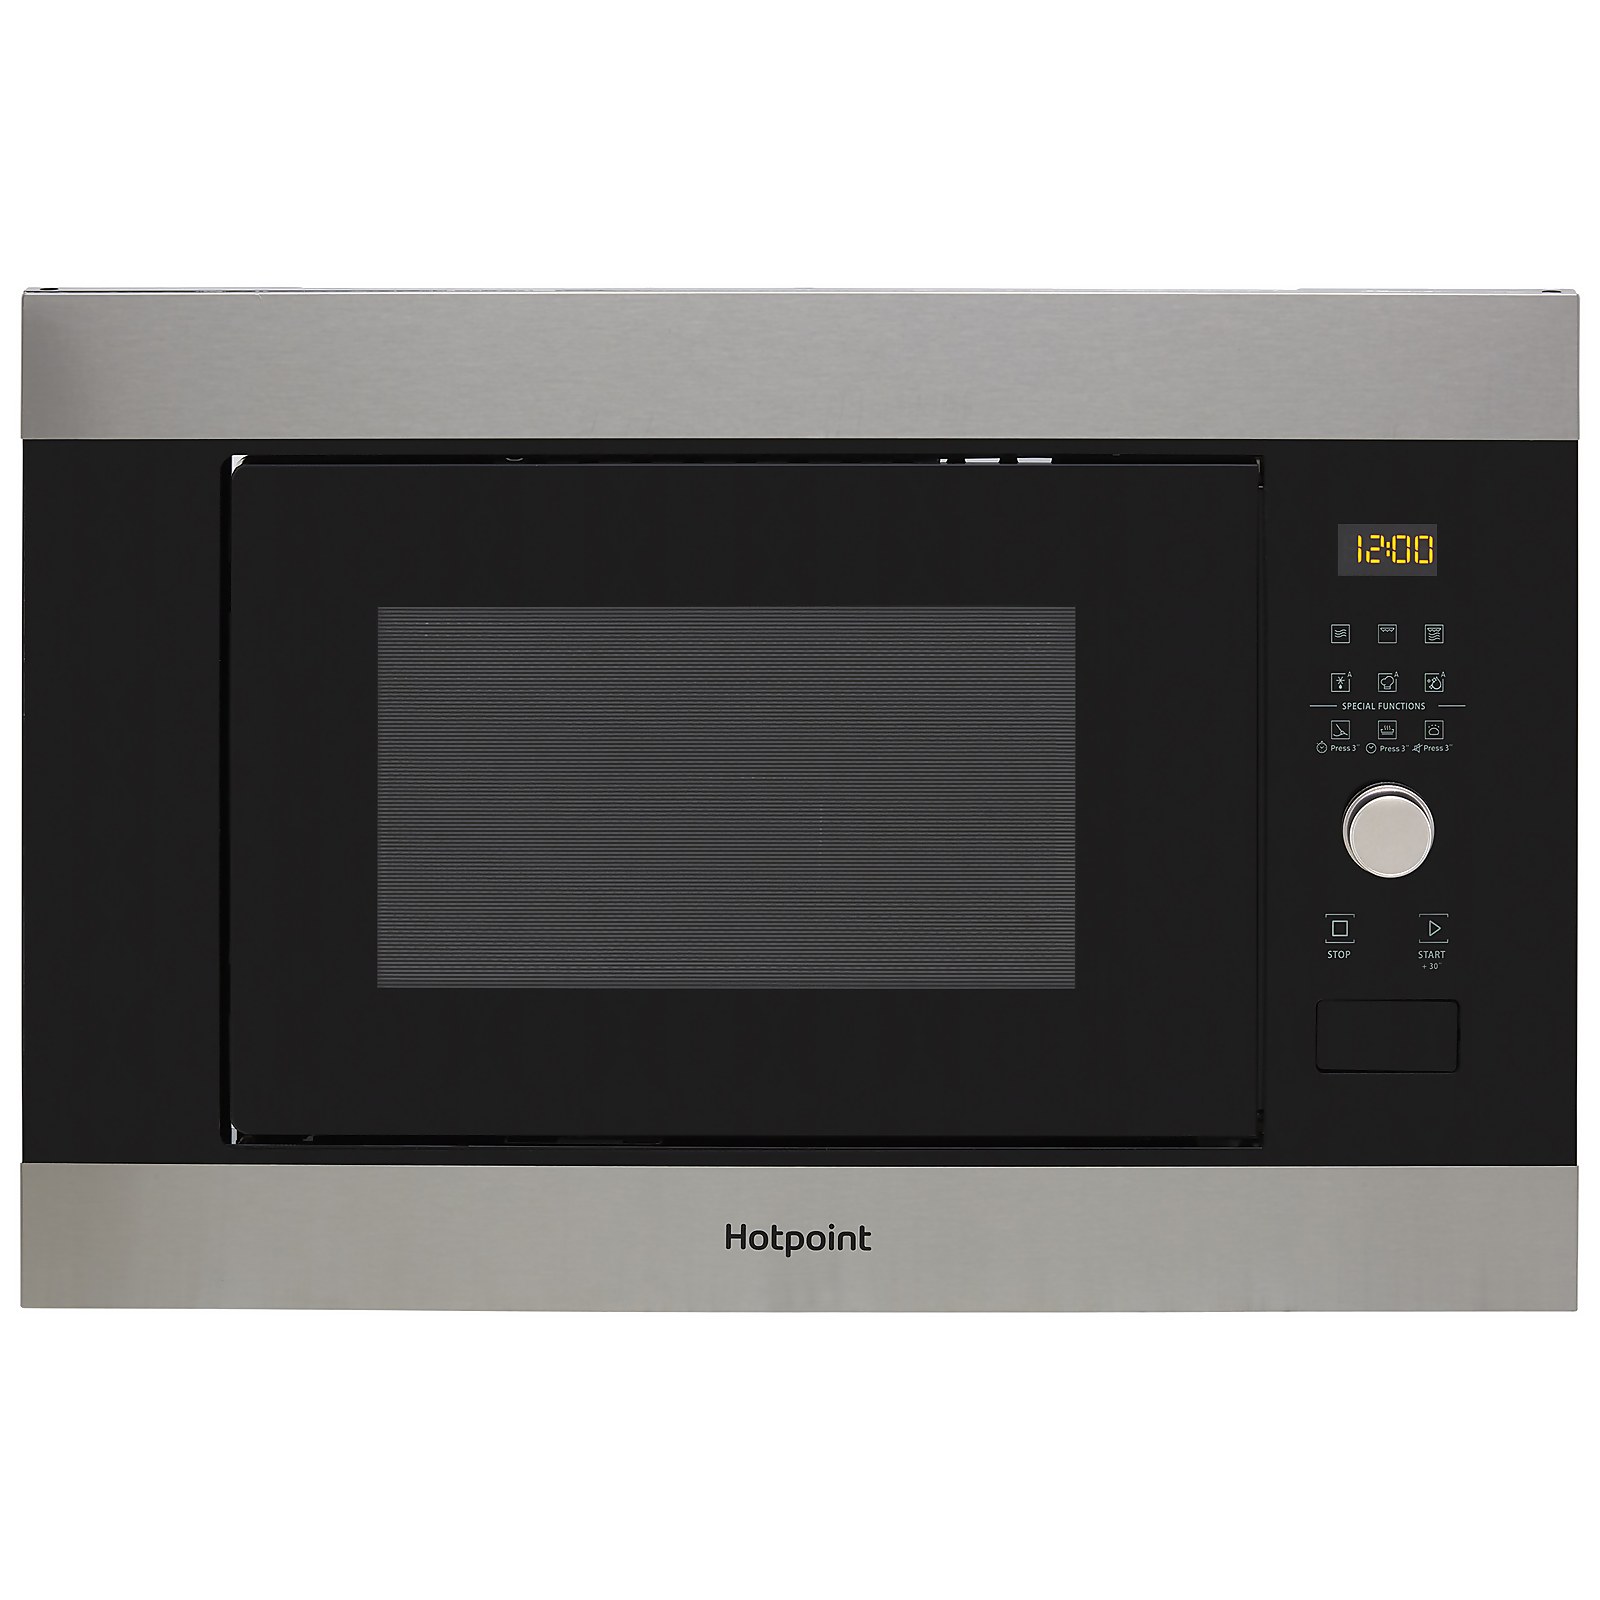 Hotpoint MF25GIXH Built In Microwave with Grill - Stainless Steel Effect